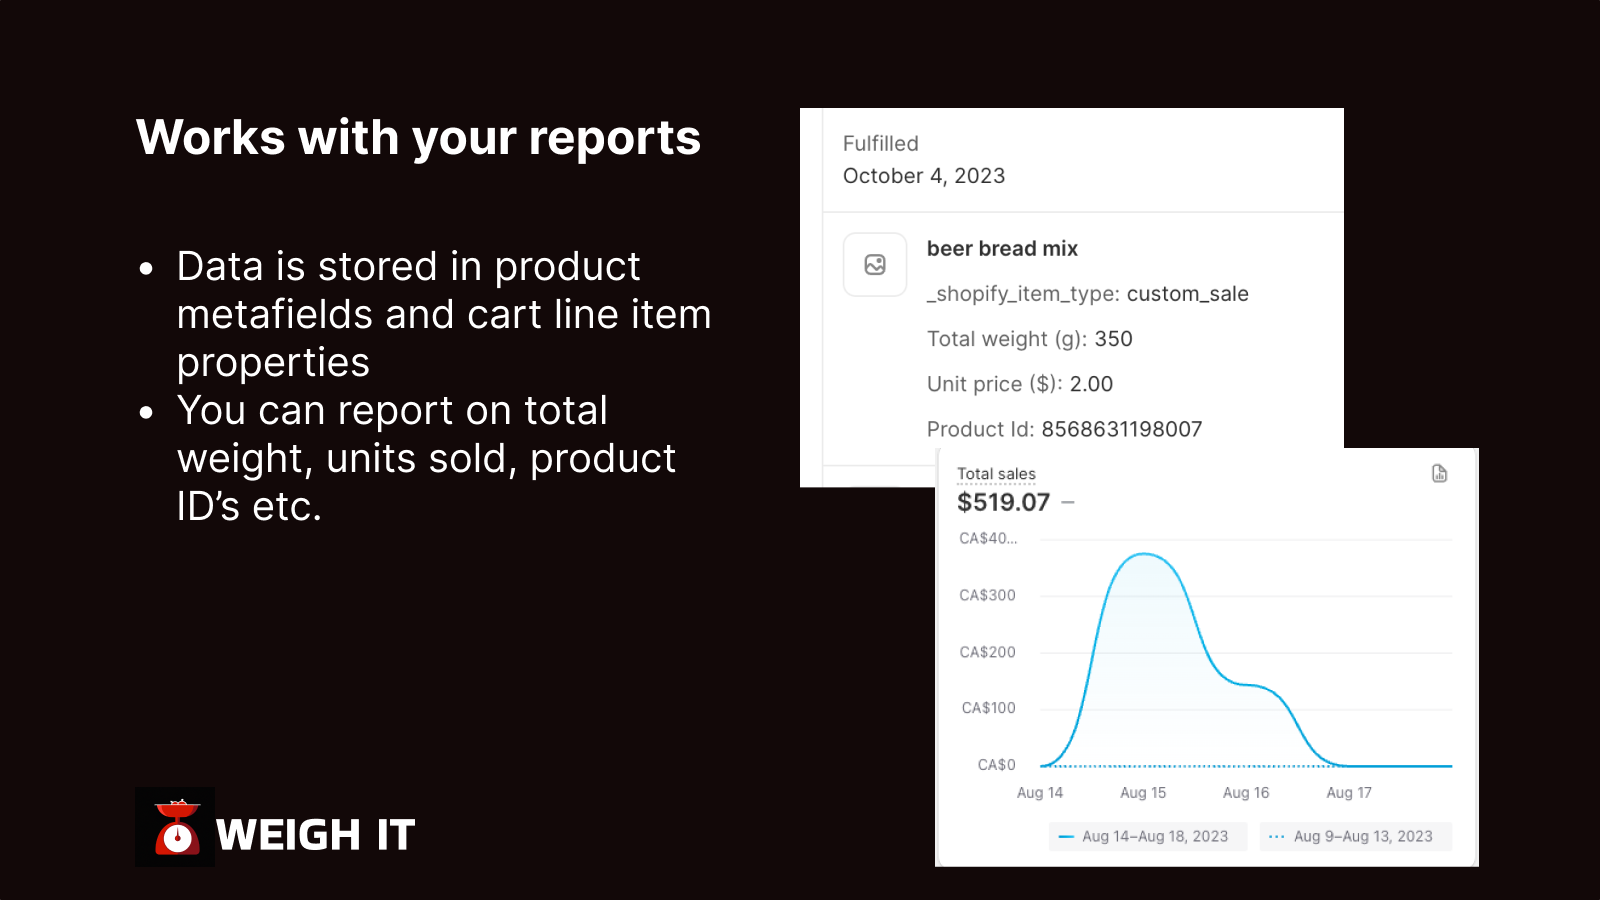 Works with your reports